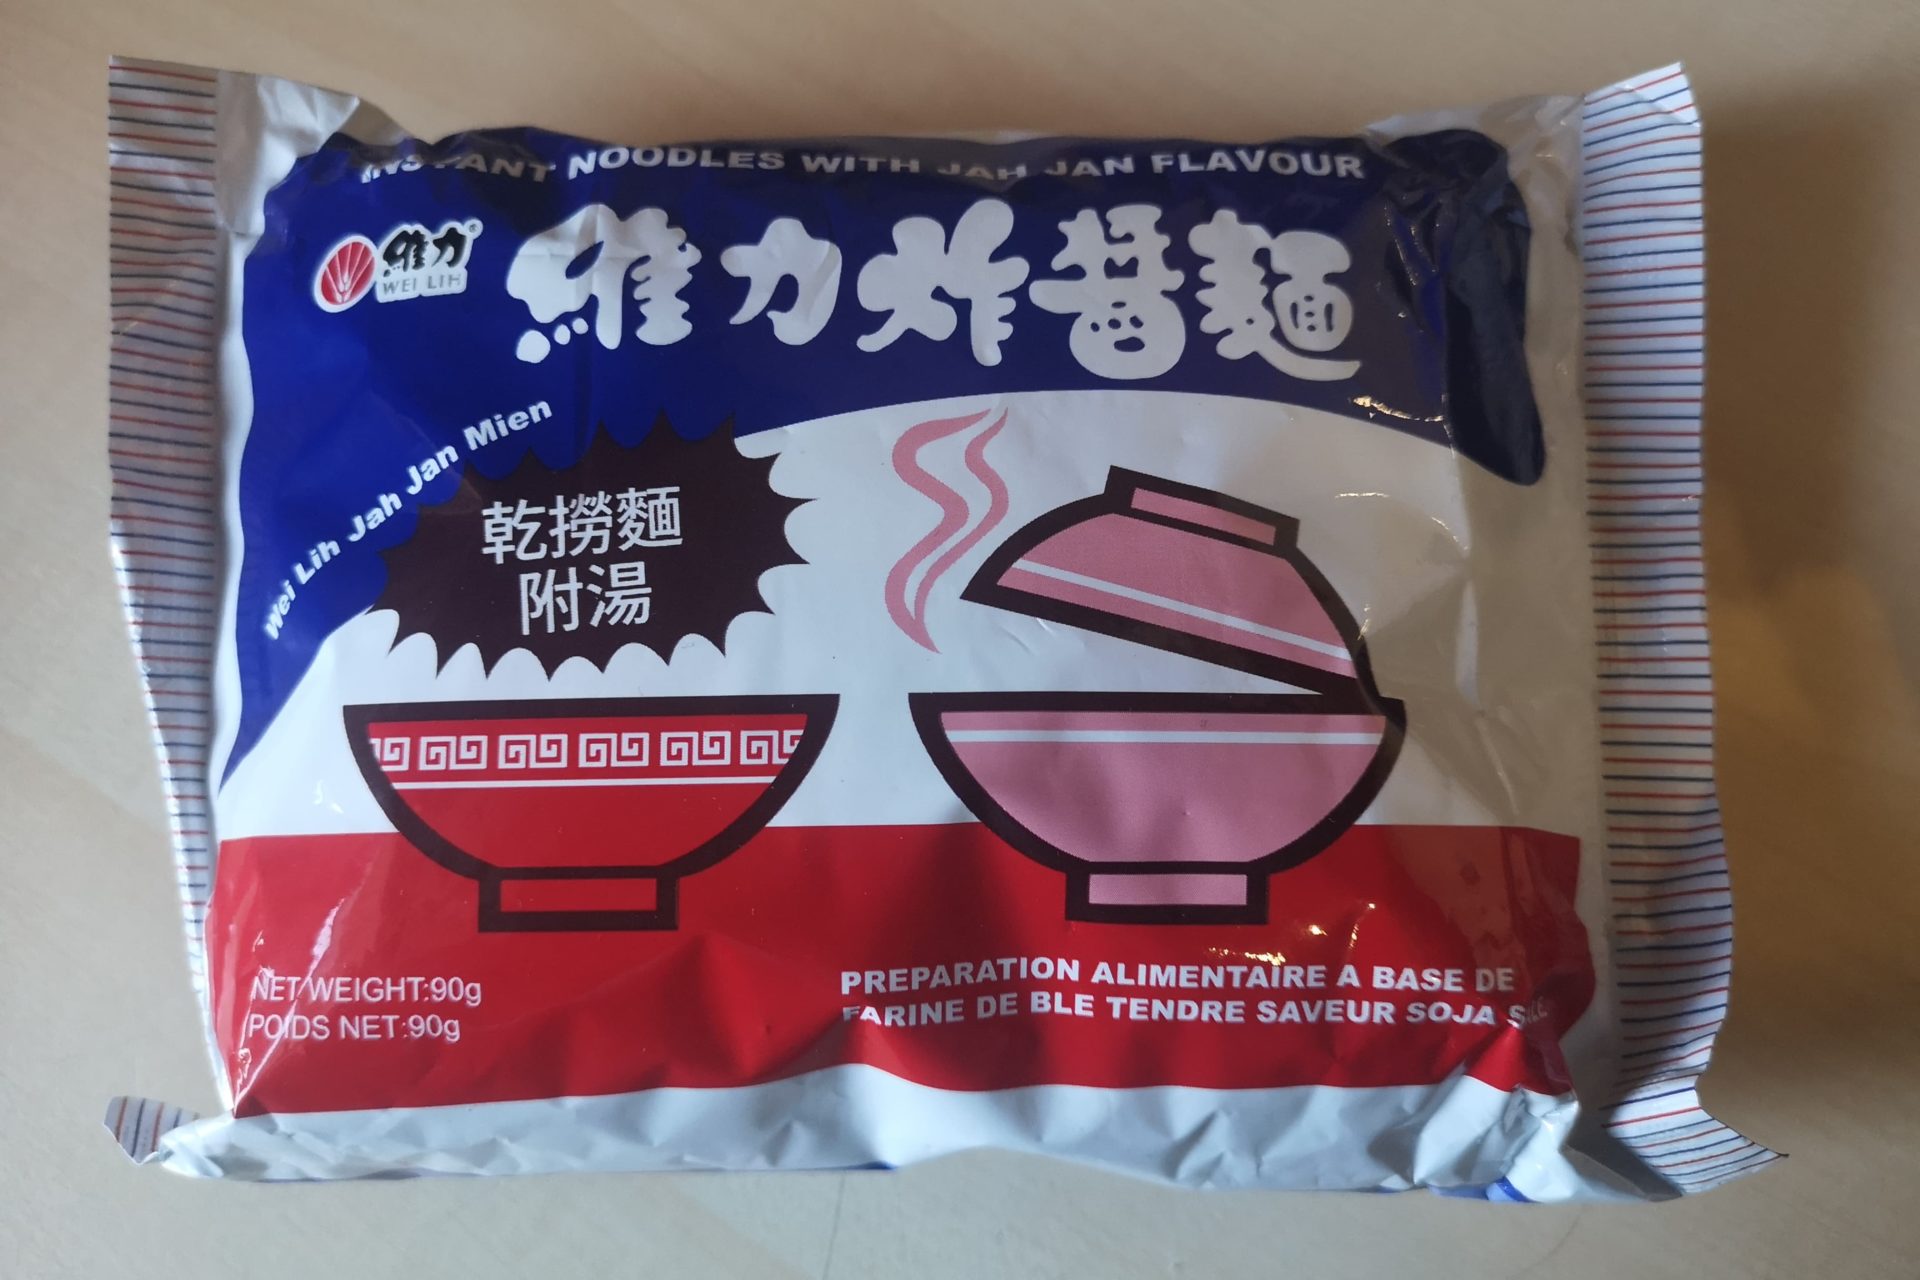 #1708: Wei Lih Instant Noodles with Jah Jan Flavour (2019 / Update 2022)